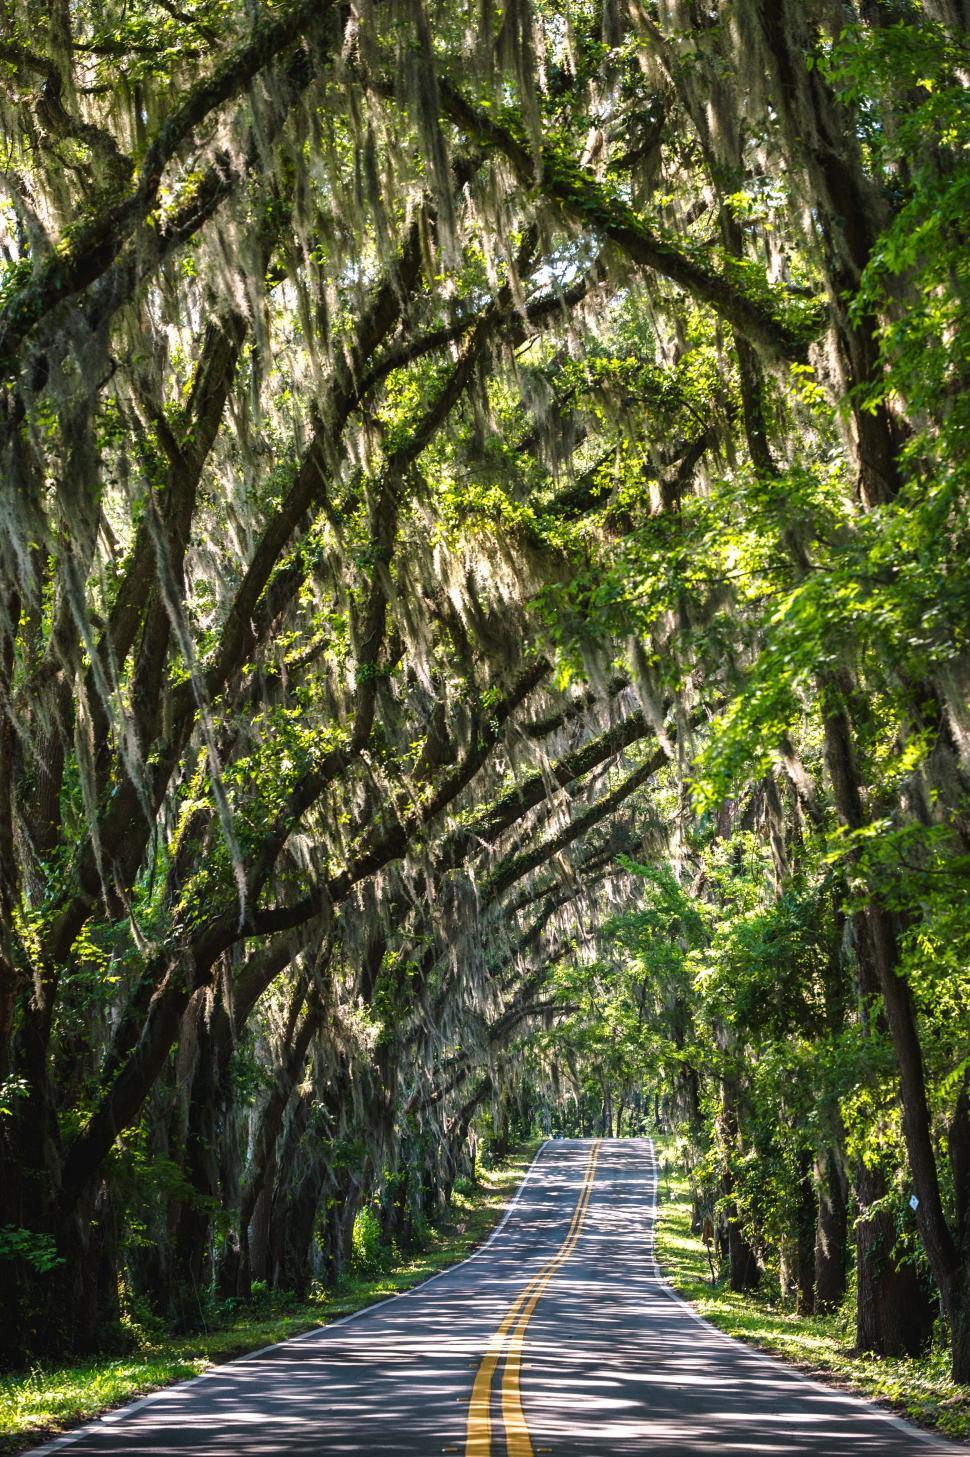 Free Image of Tree-Lined Road With Spanish Moss 